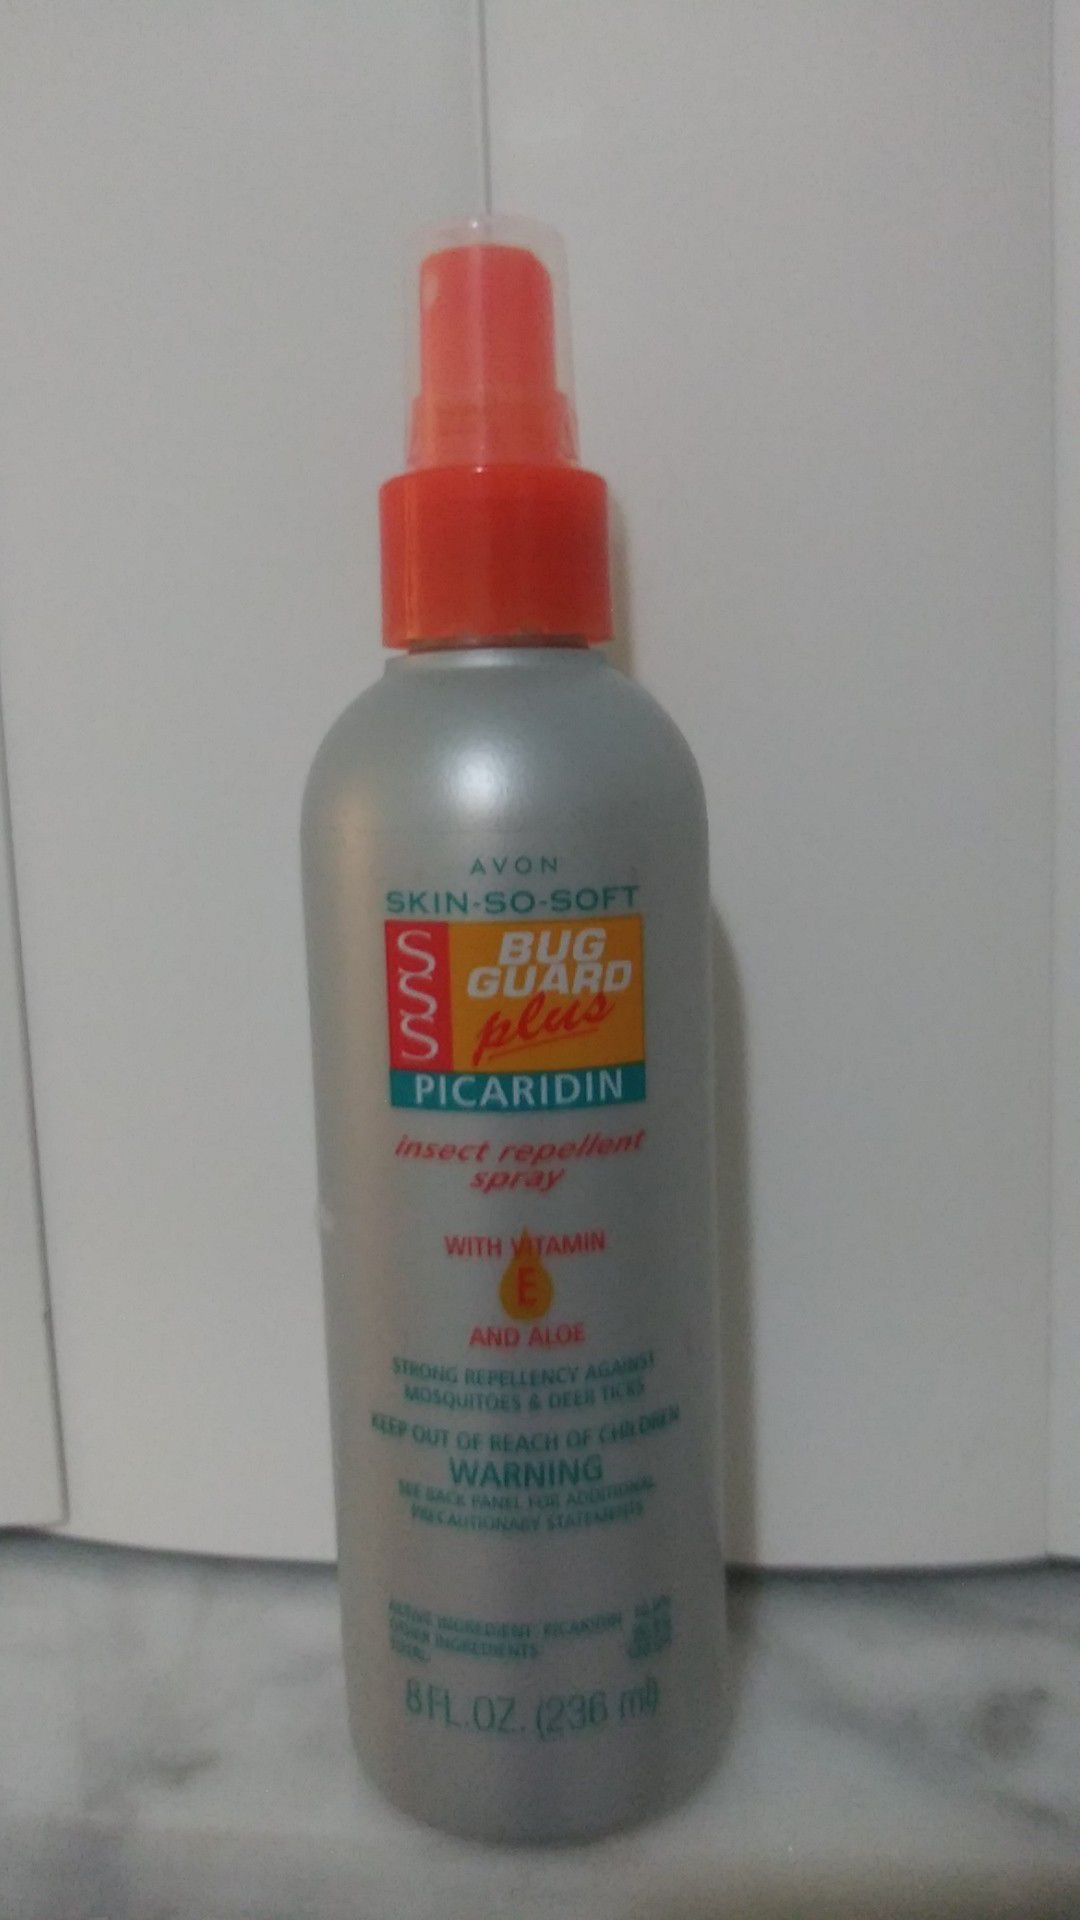 Insect repellent spray